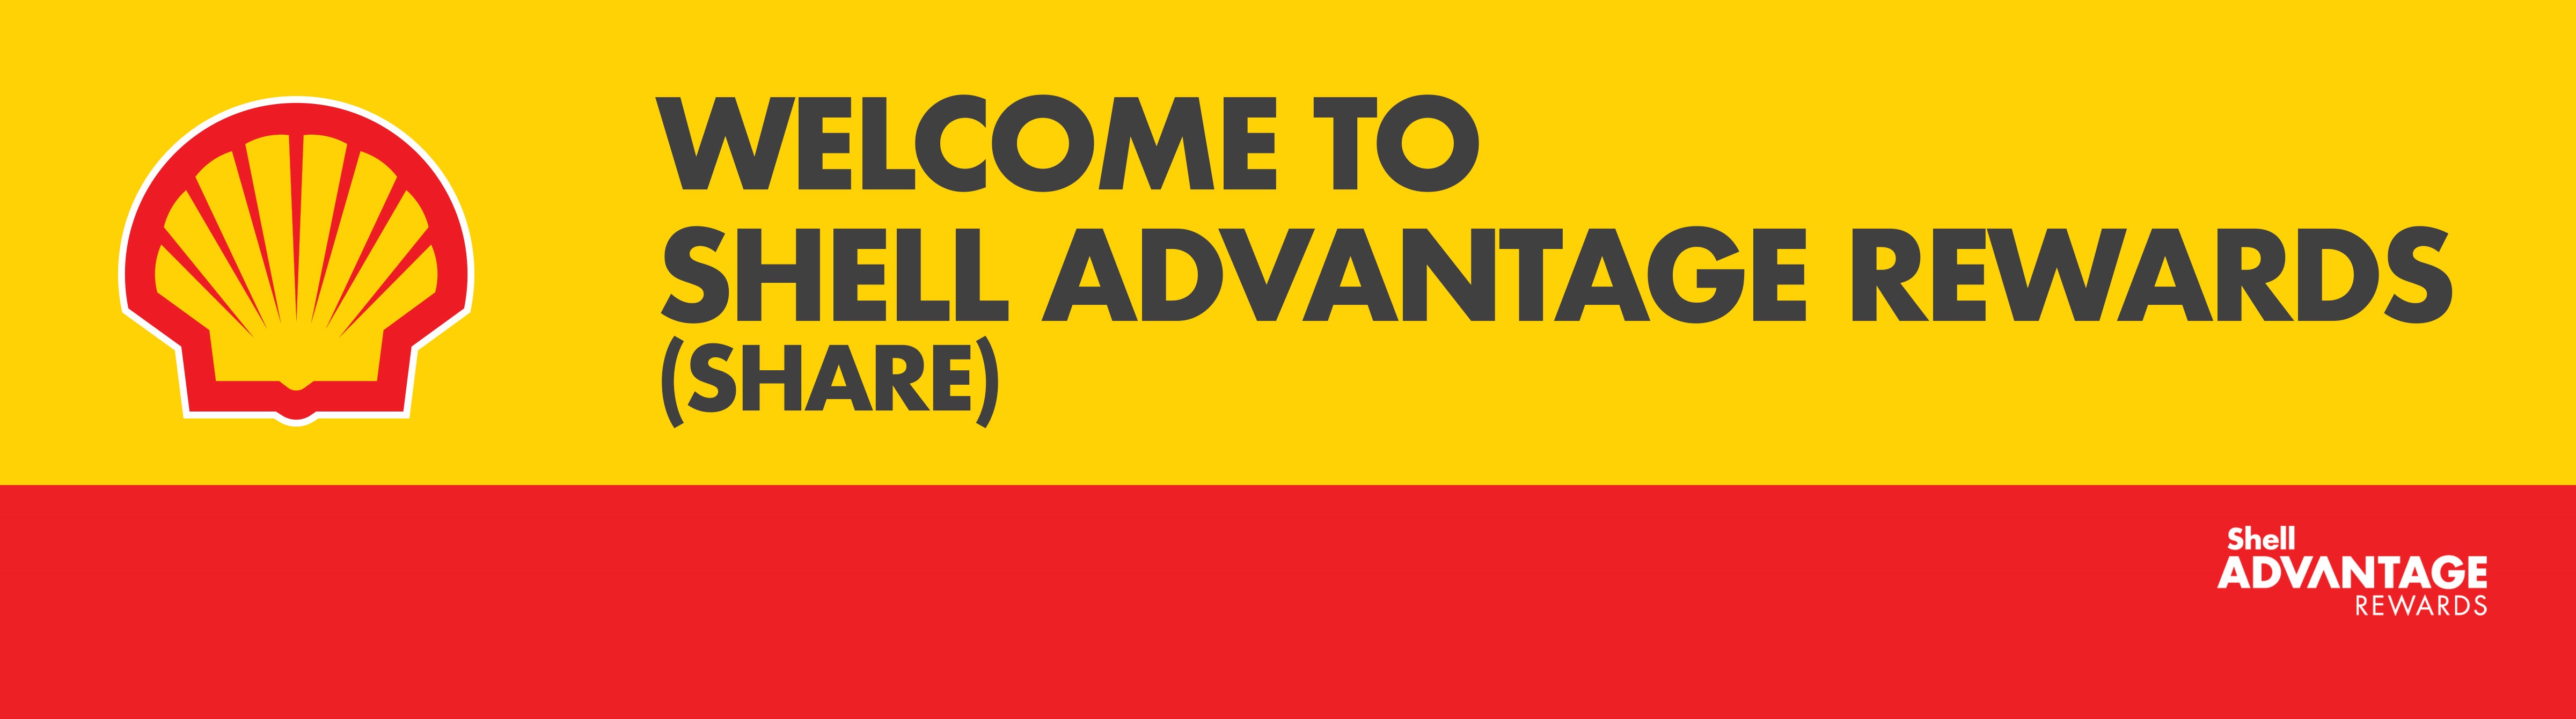 WELCOME TO SHELL ADVANTAGE REWARDS (SHARE)